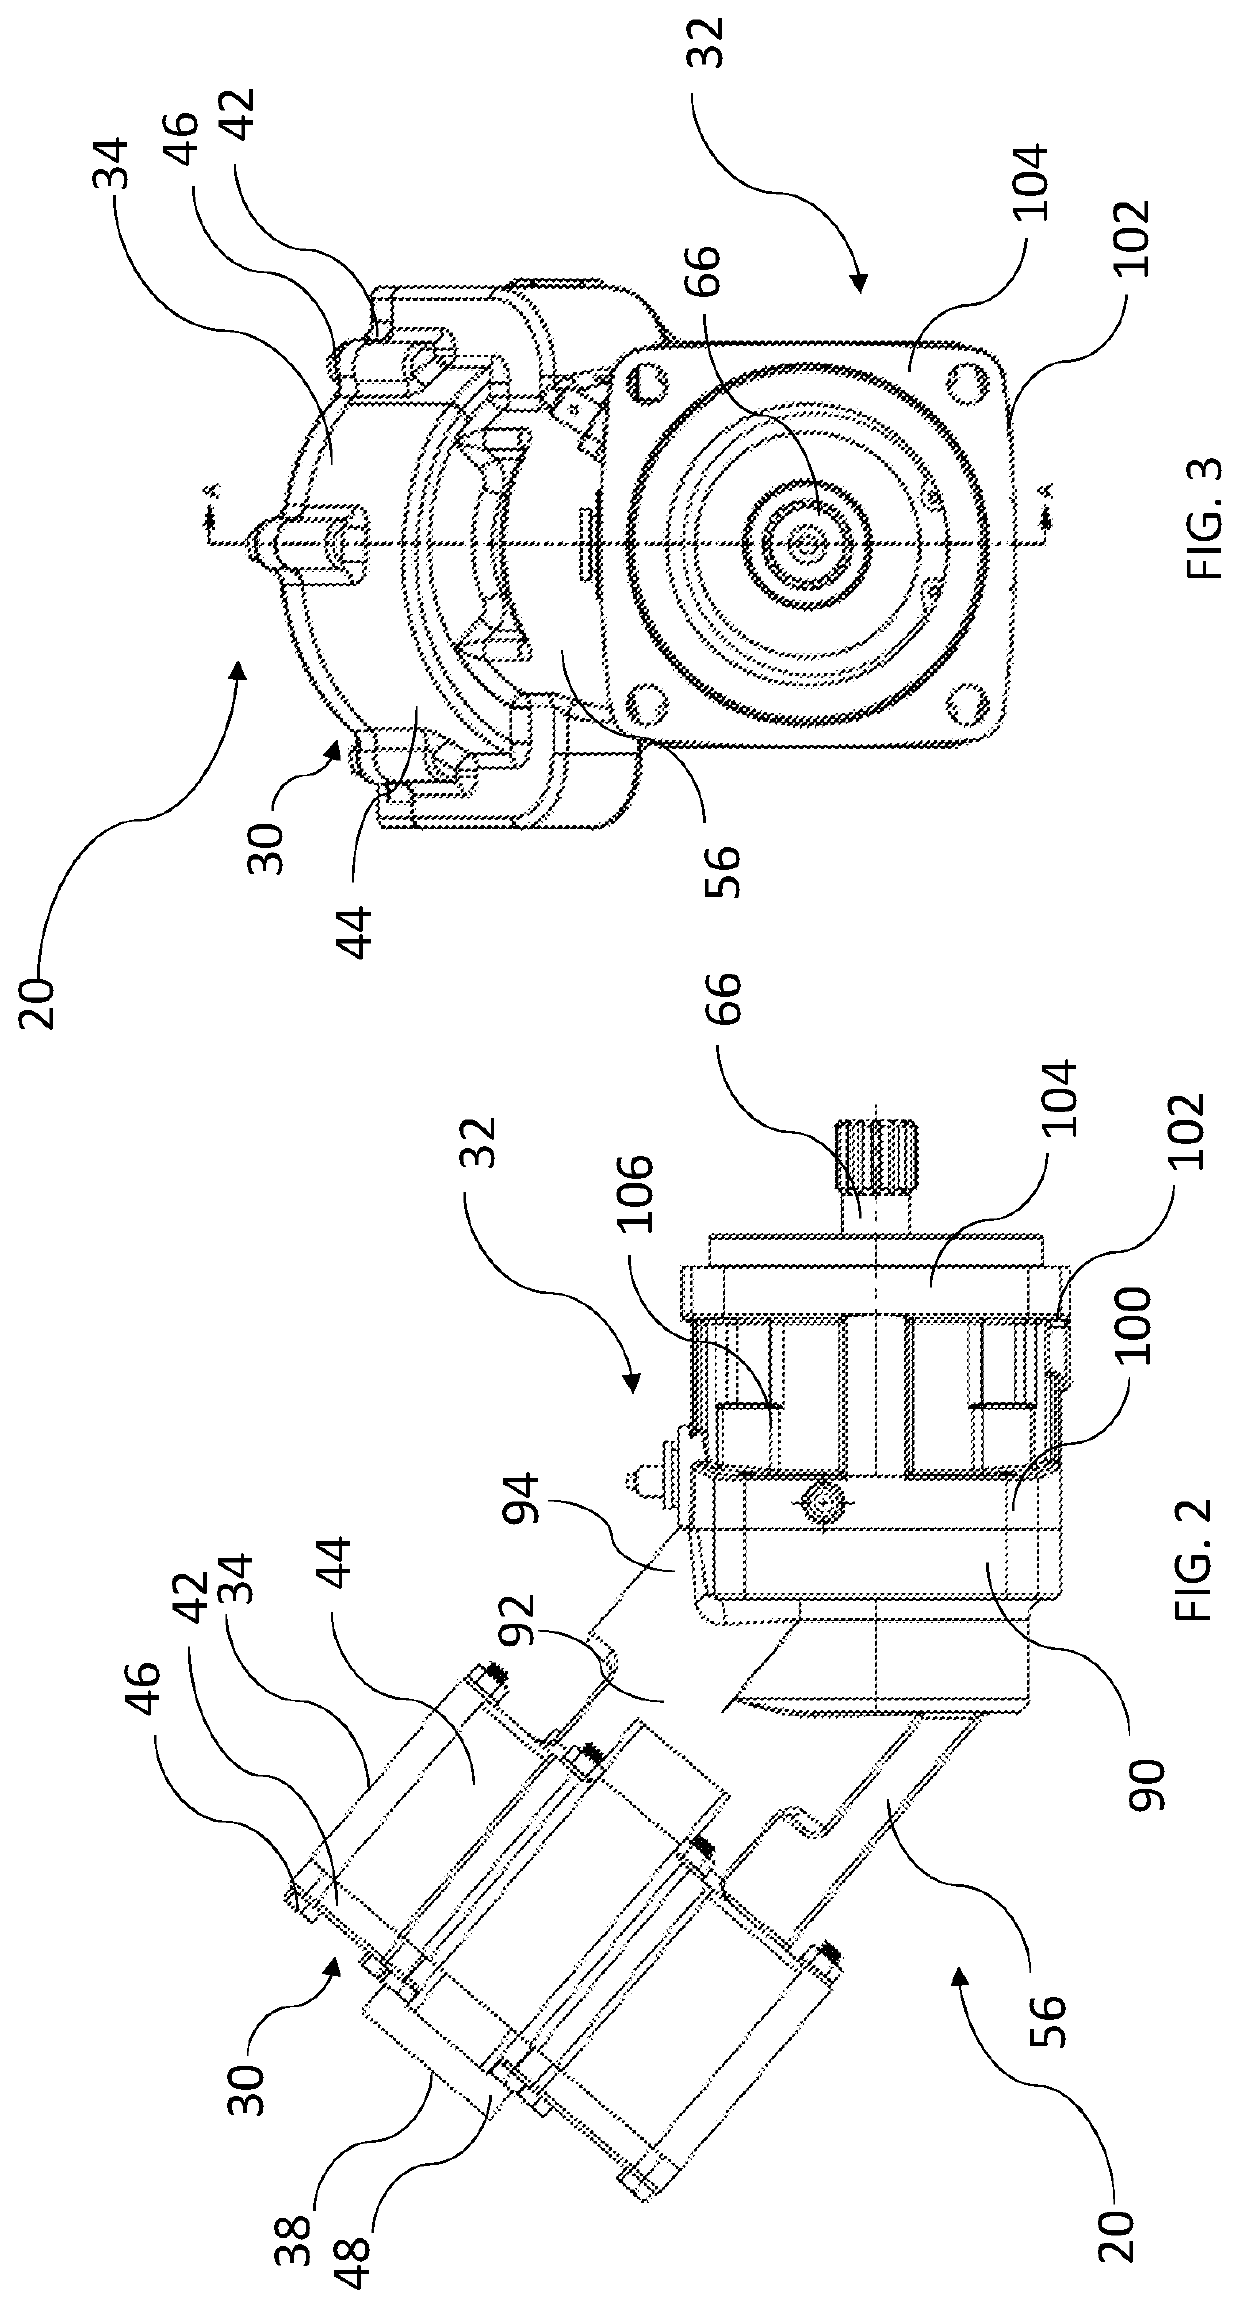 Bent axis hydraulic pump with centrifugal assist